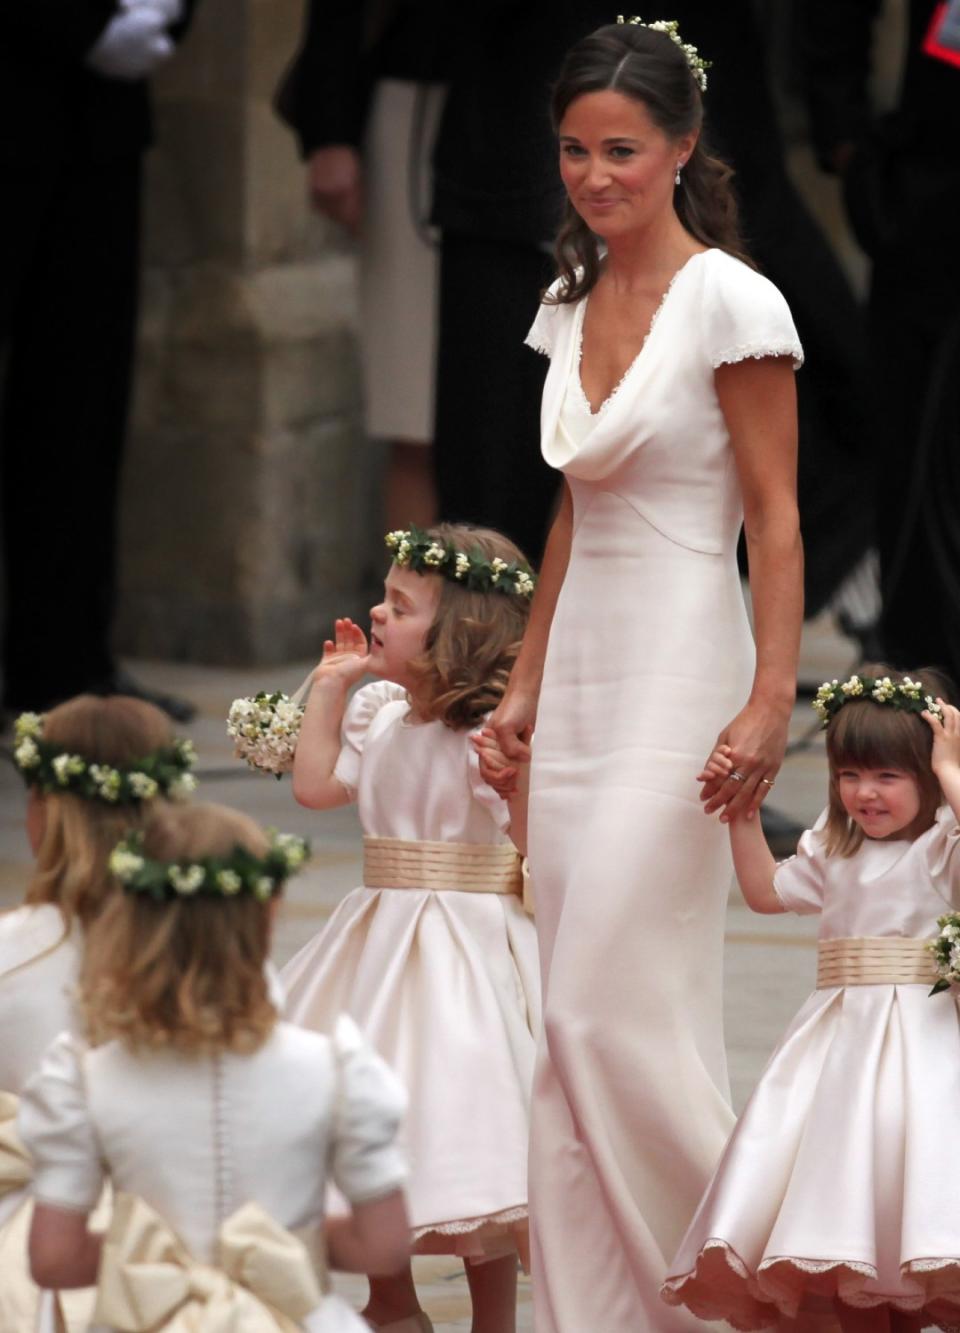 Caring sisters honouring their mum on Kate's wedding day